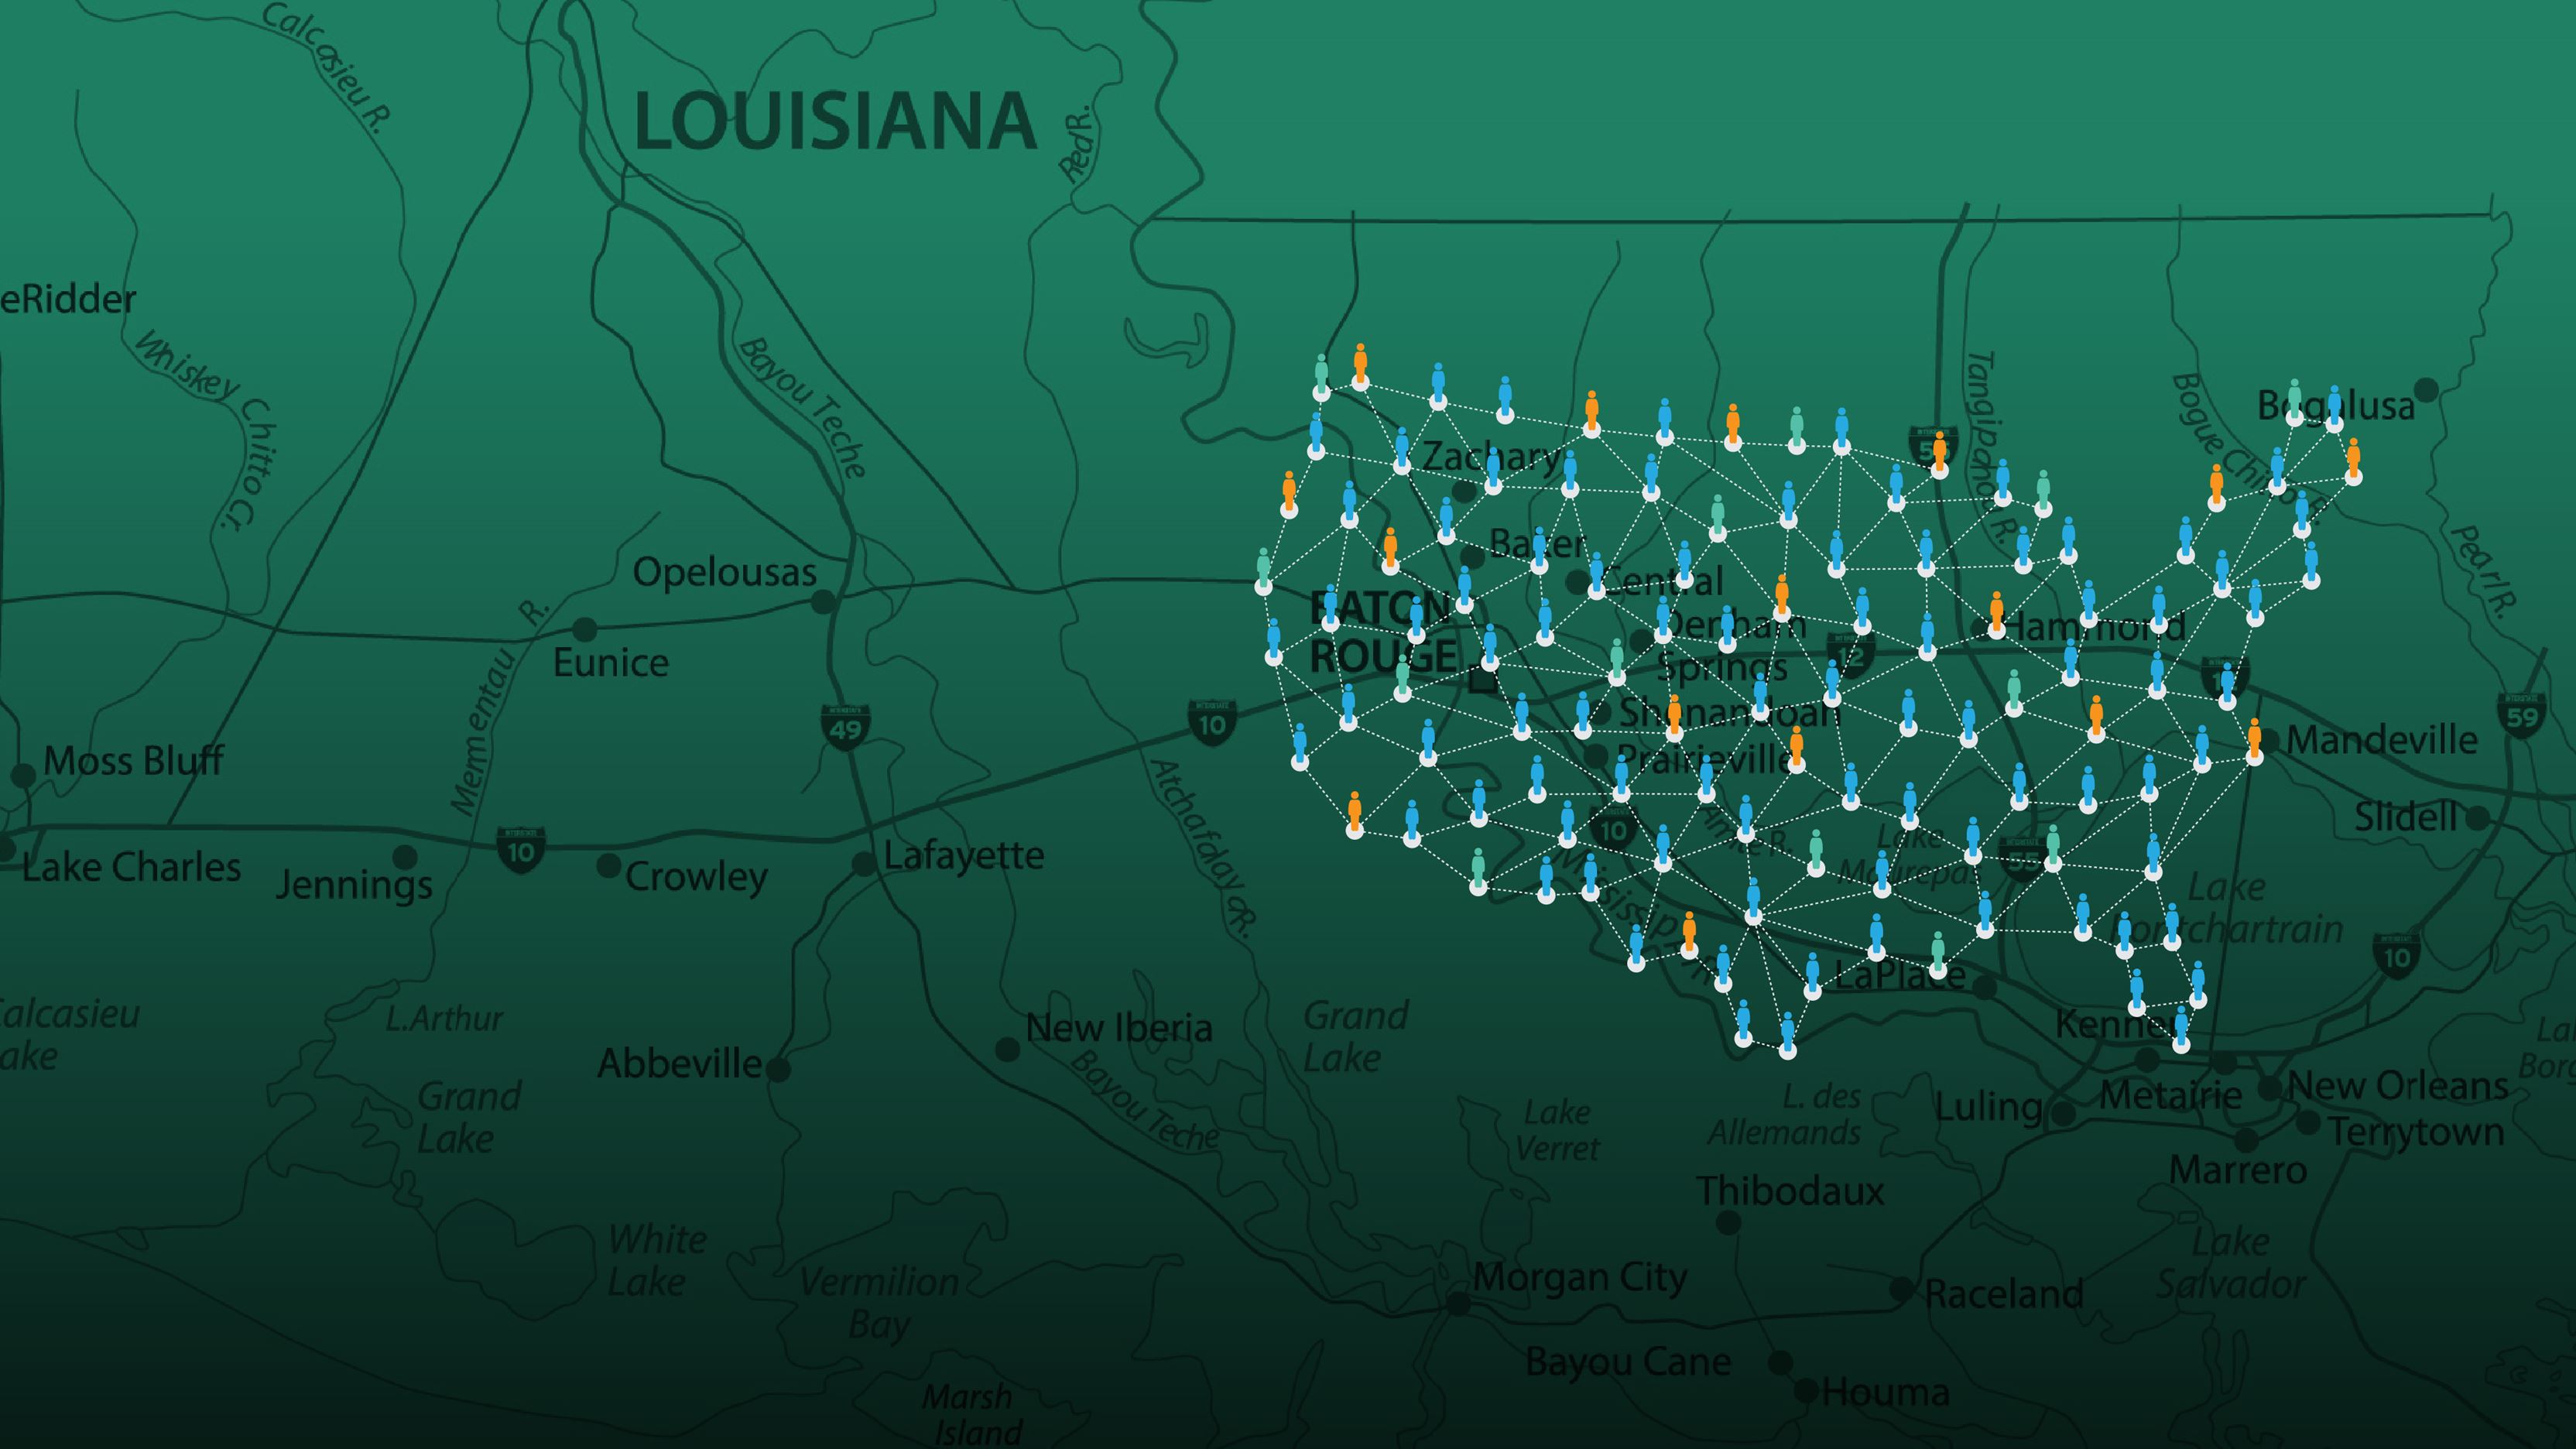 Road map of Louisiana, with a graphic overlay of networked people